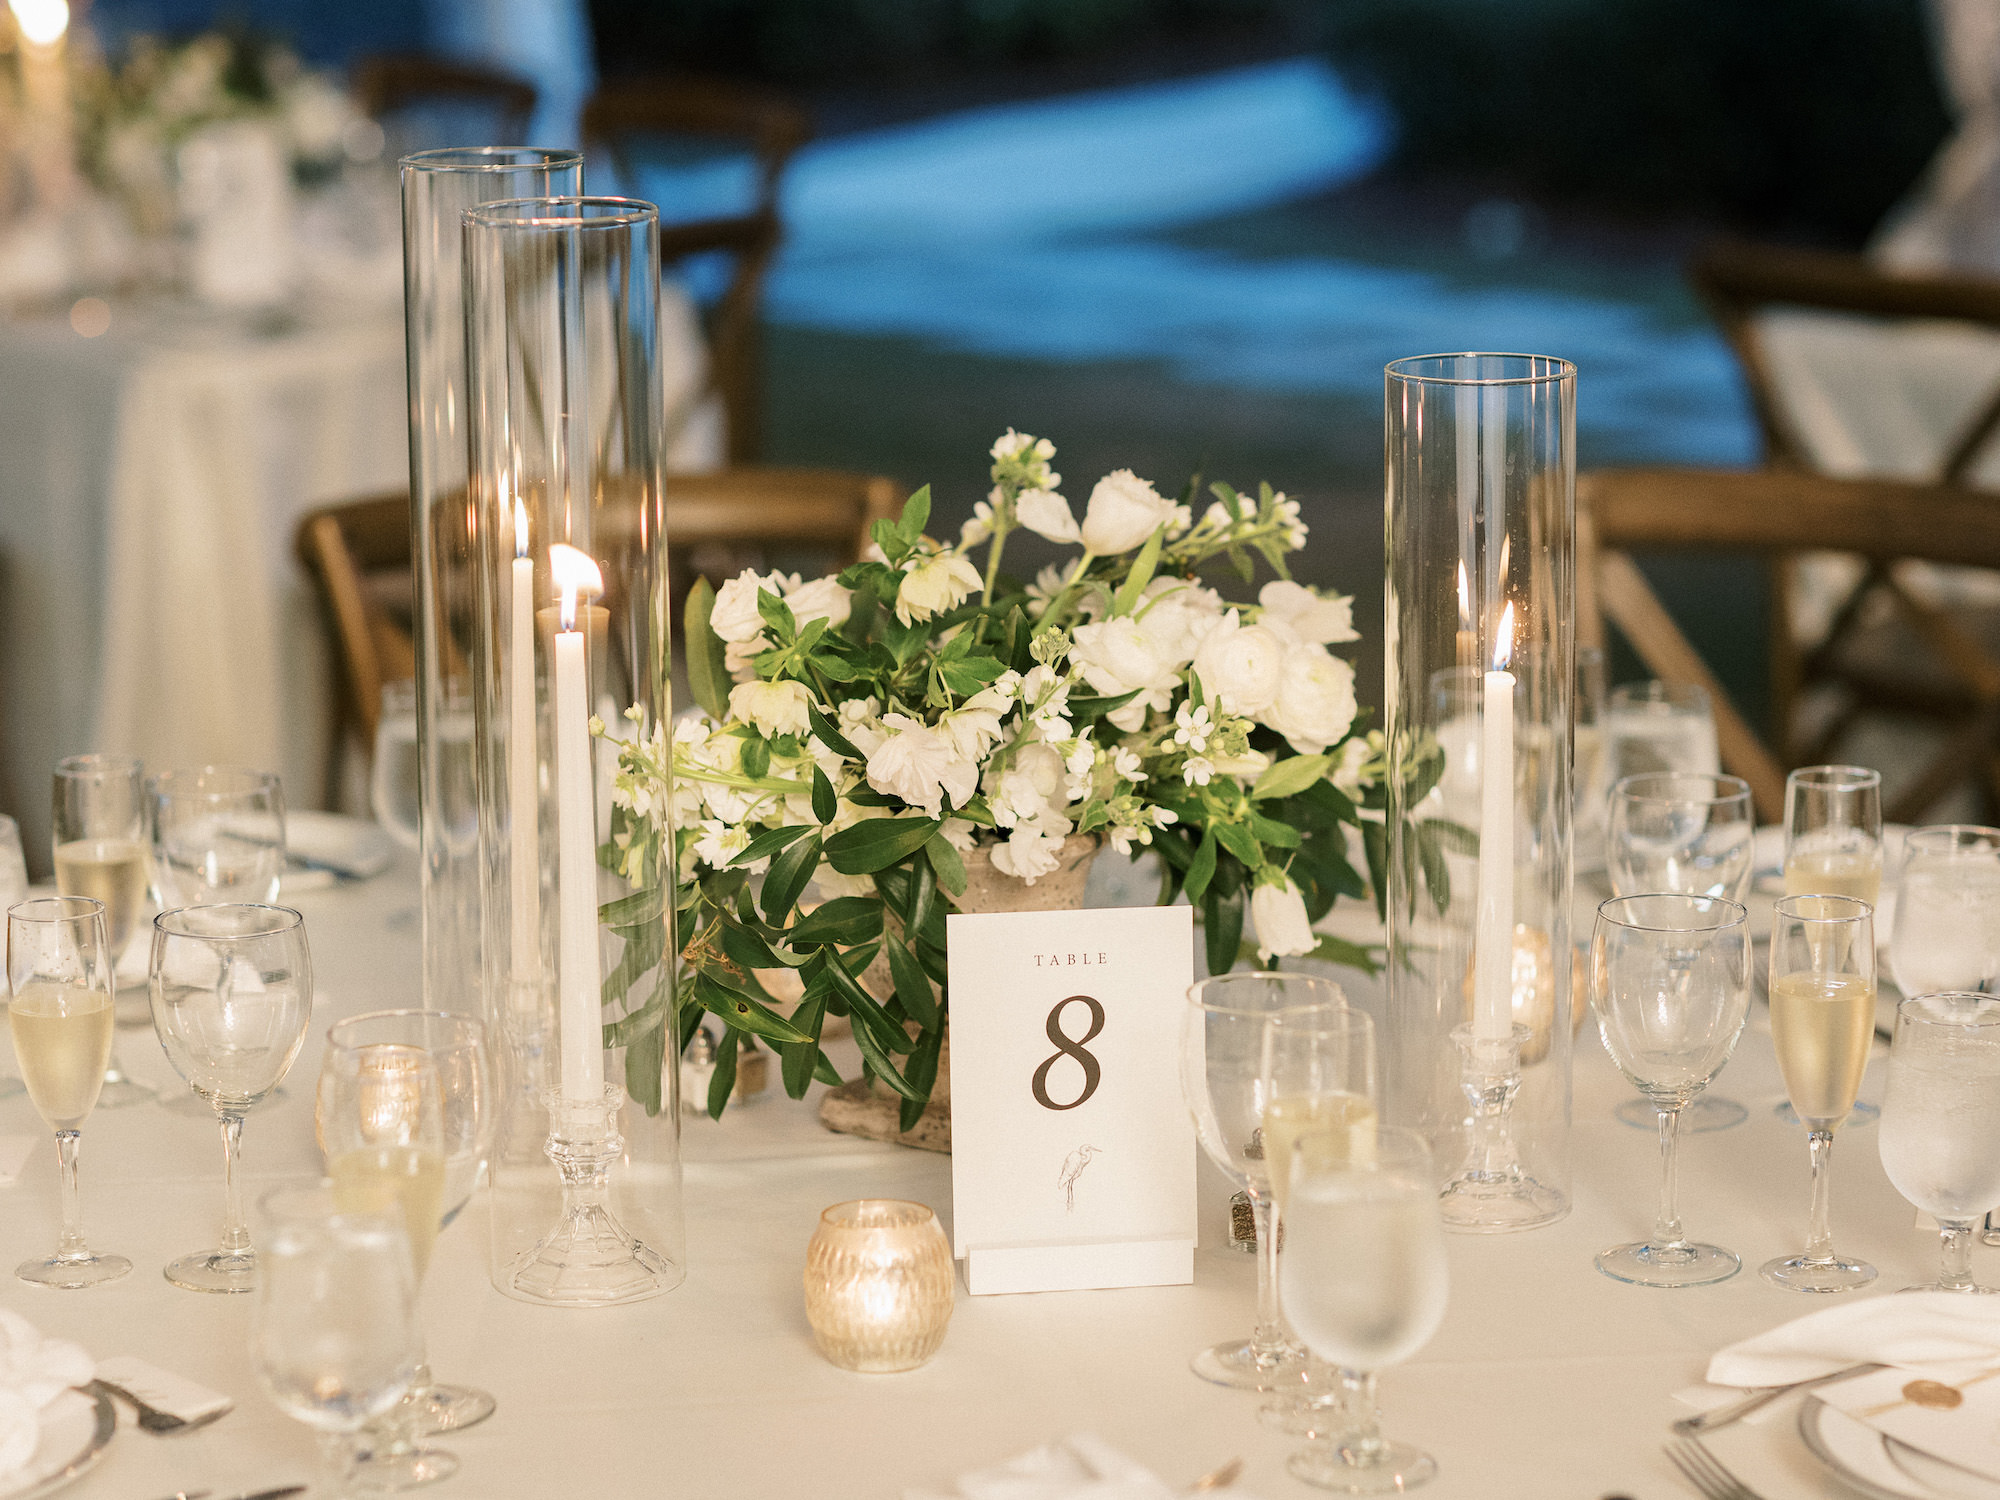 Old Florida Elegant Wedding Reception Decor, Candlesticks in Hurricane Glass Tumblers, Low Greenery and White Floral Centerpiece